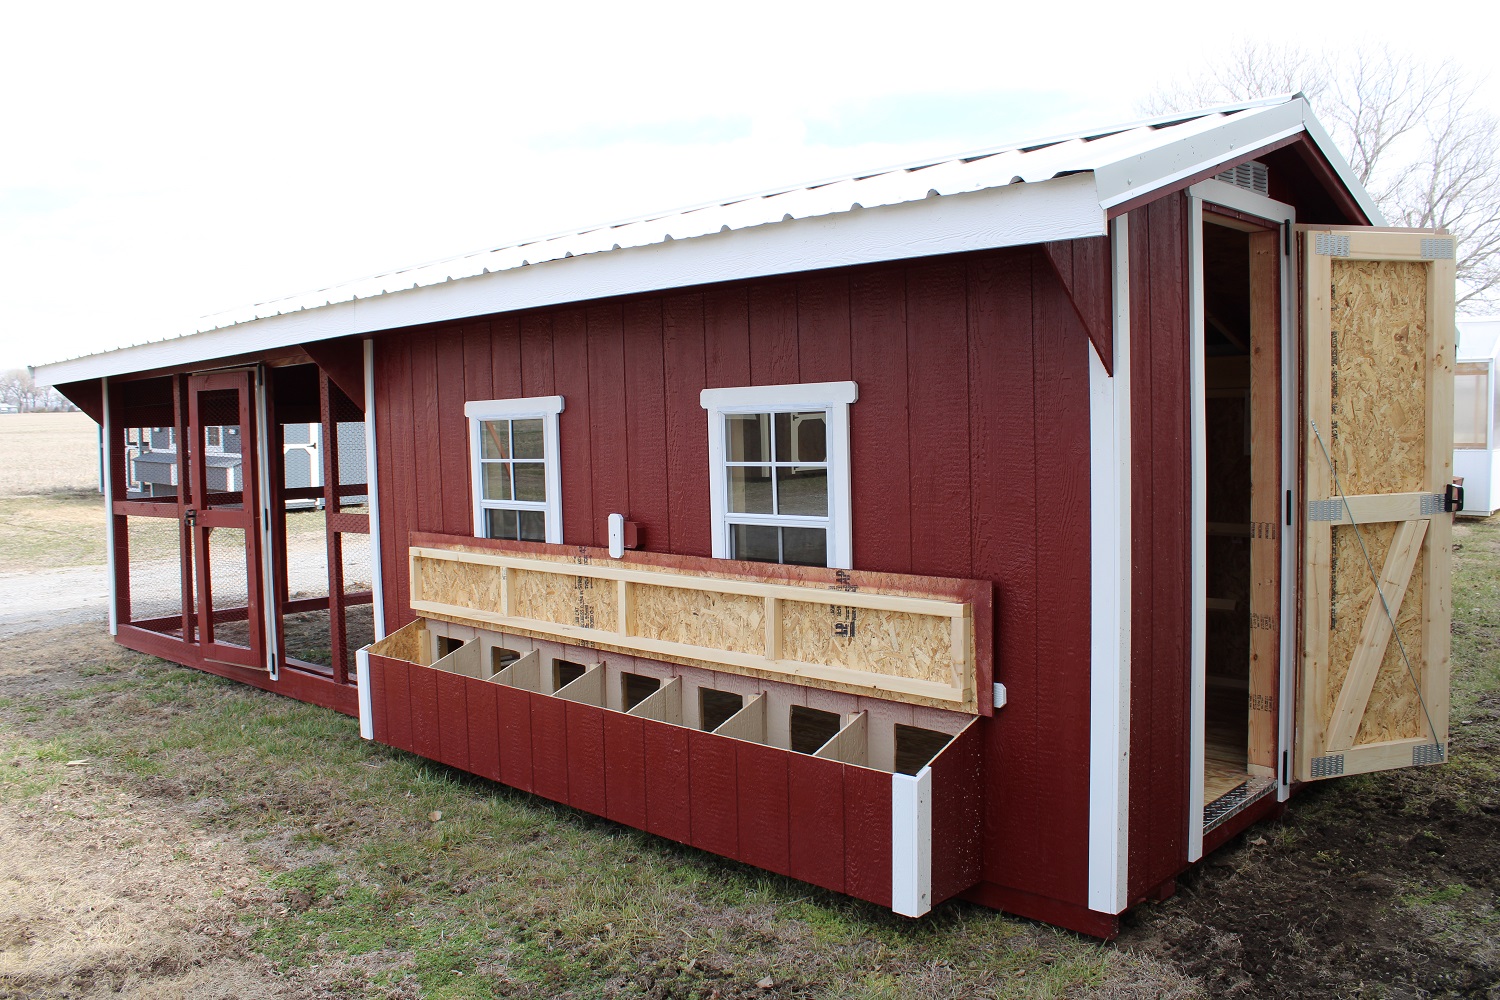 8'x12' Chicken Coop with Solar Chicken Door, Run and Separate Nesting Boxes FOR SALE | ProjectivePortableBuildings.com